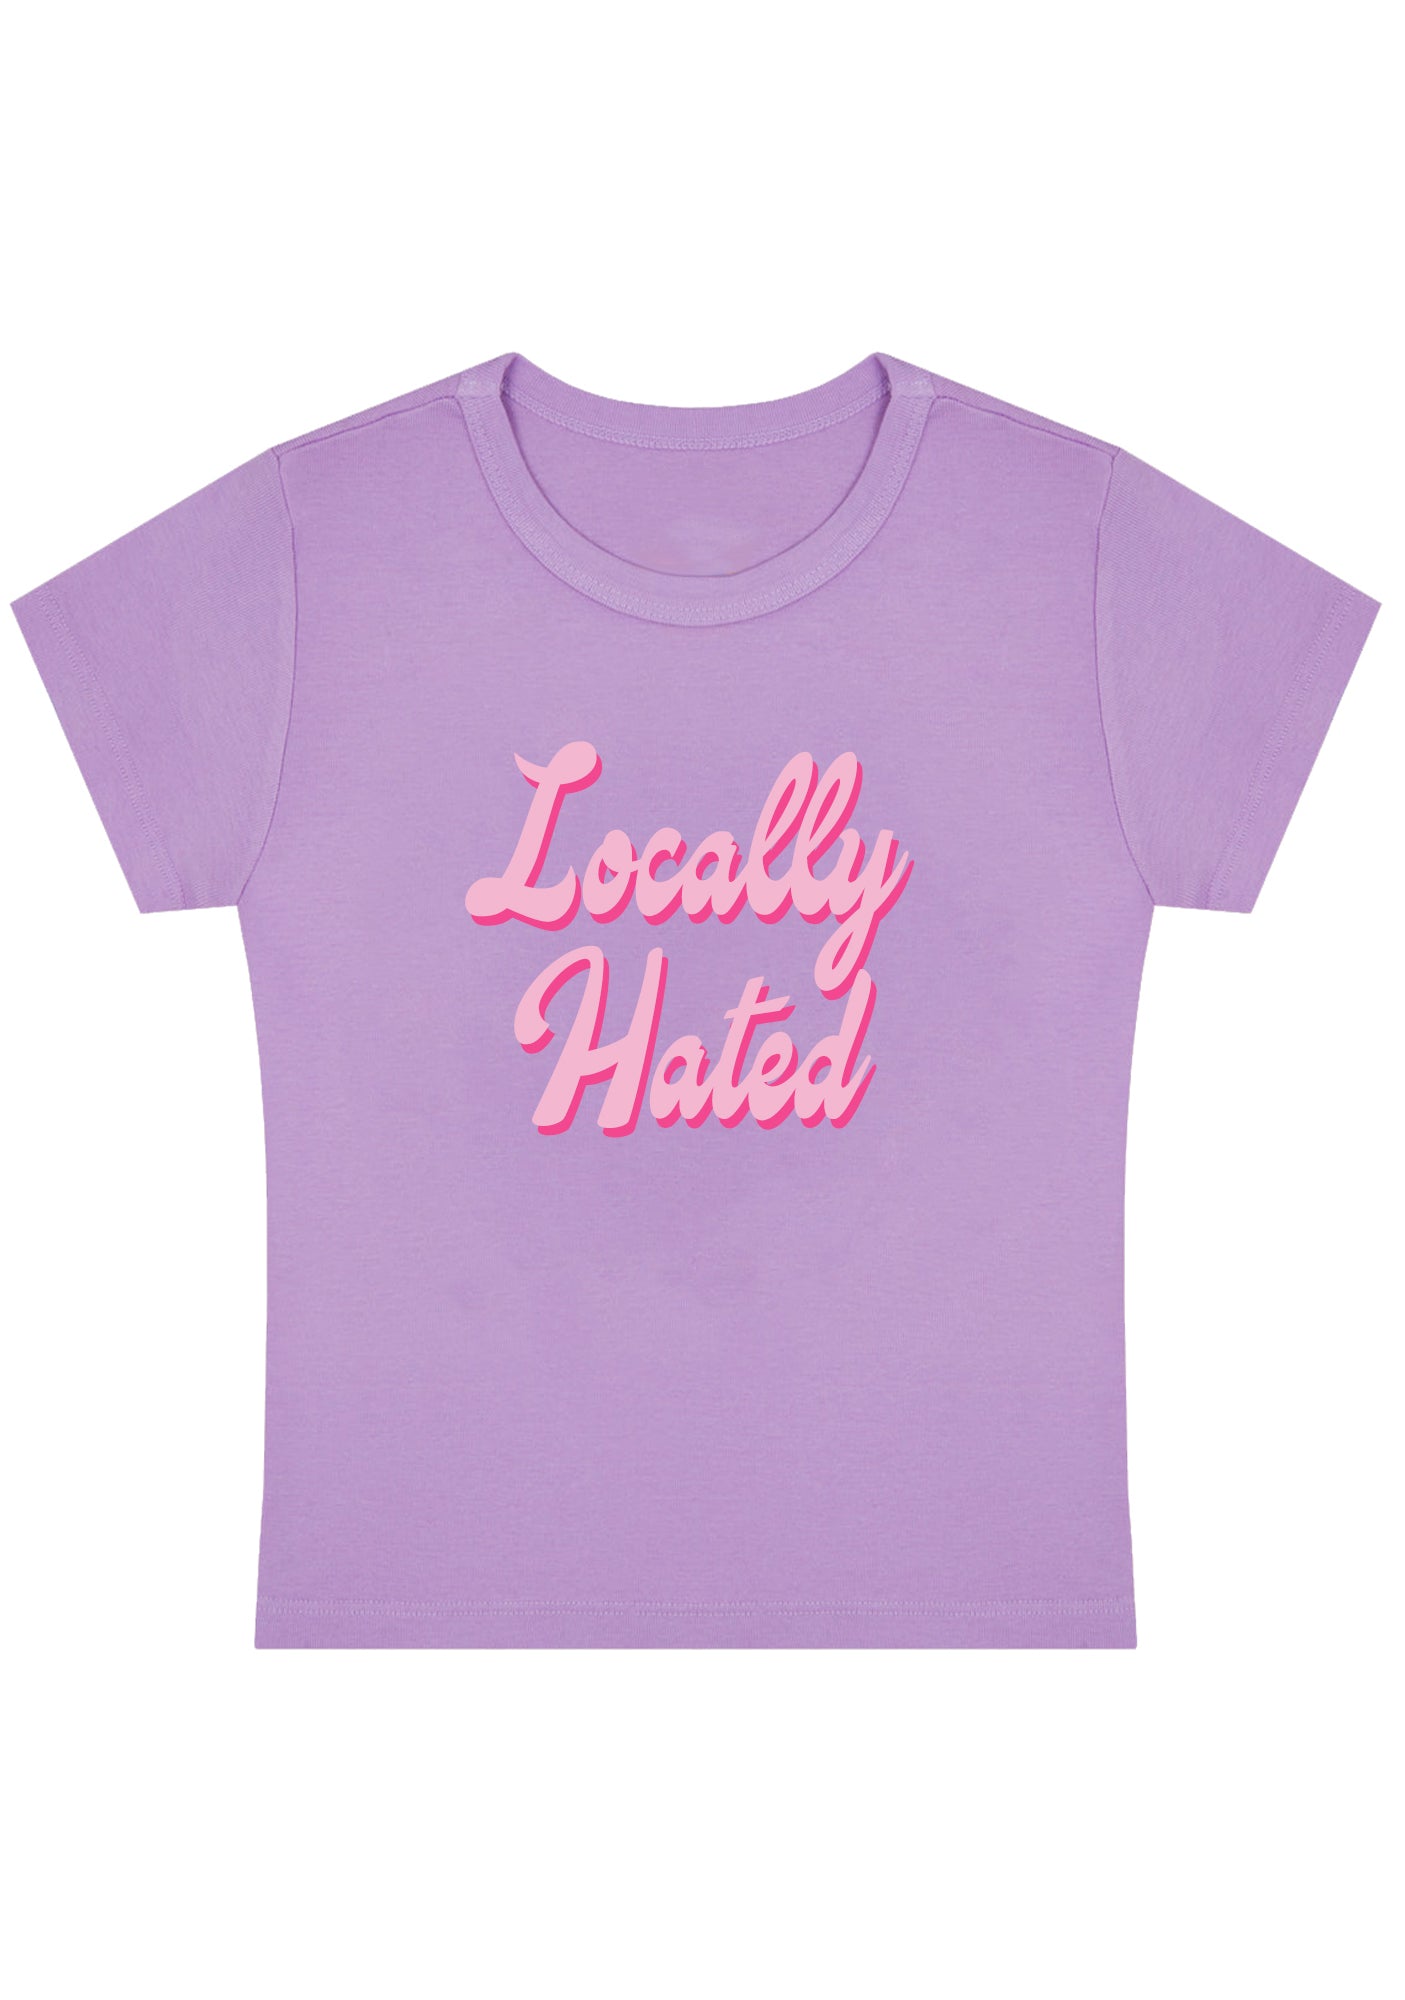 Locally Hated Y2K Baby Tee